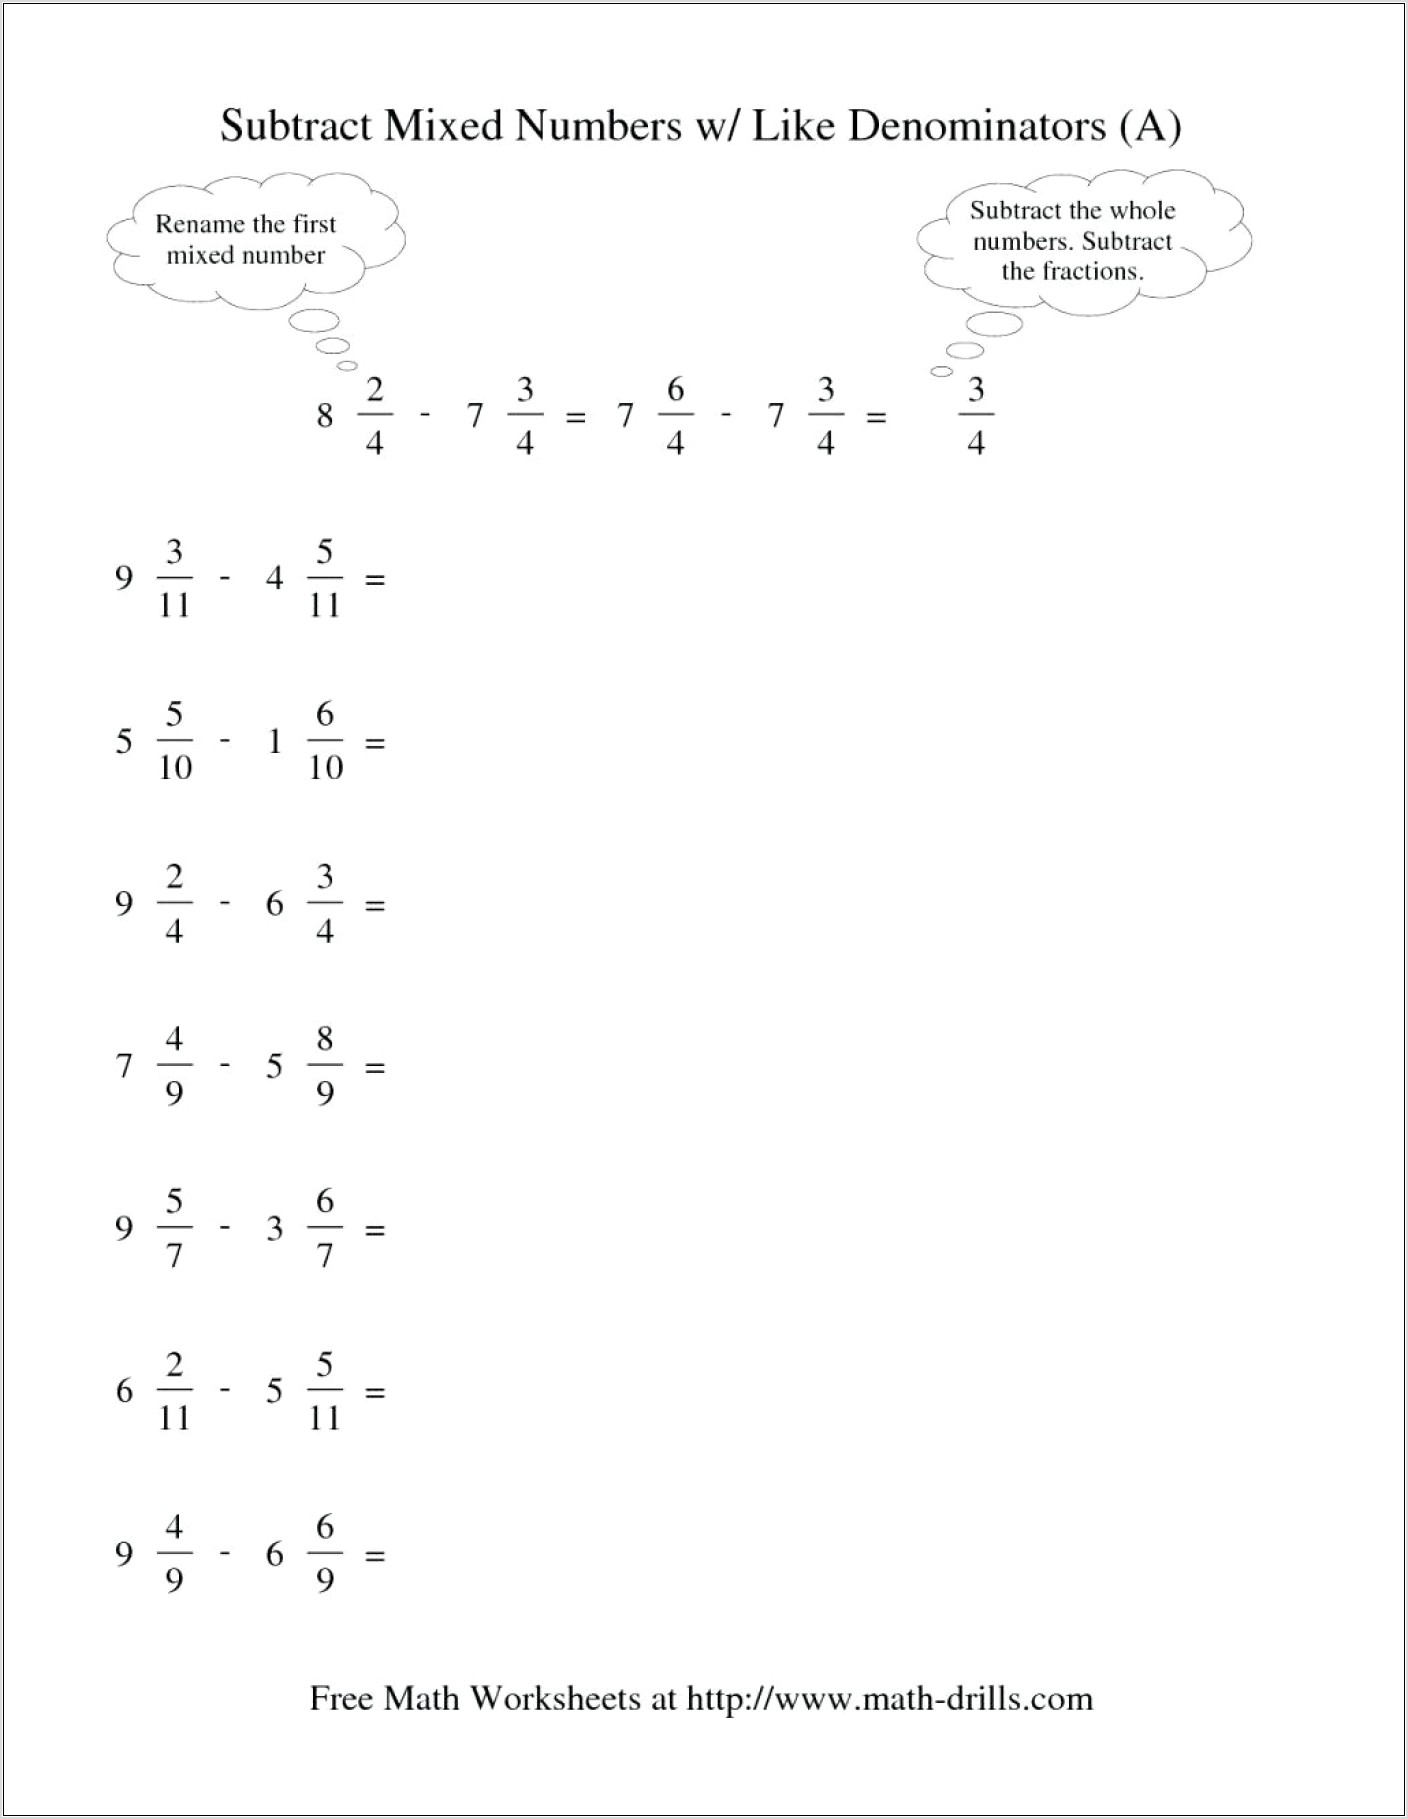 Subtracting Fractions With Whole Numbers Worksheet